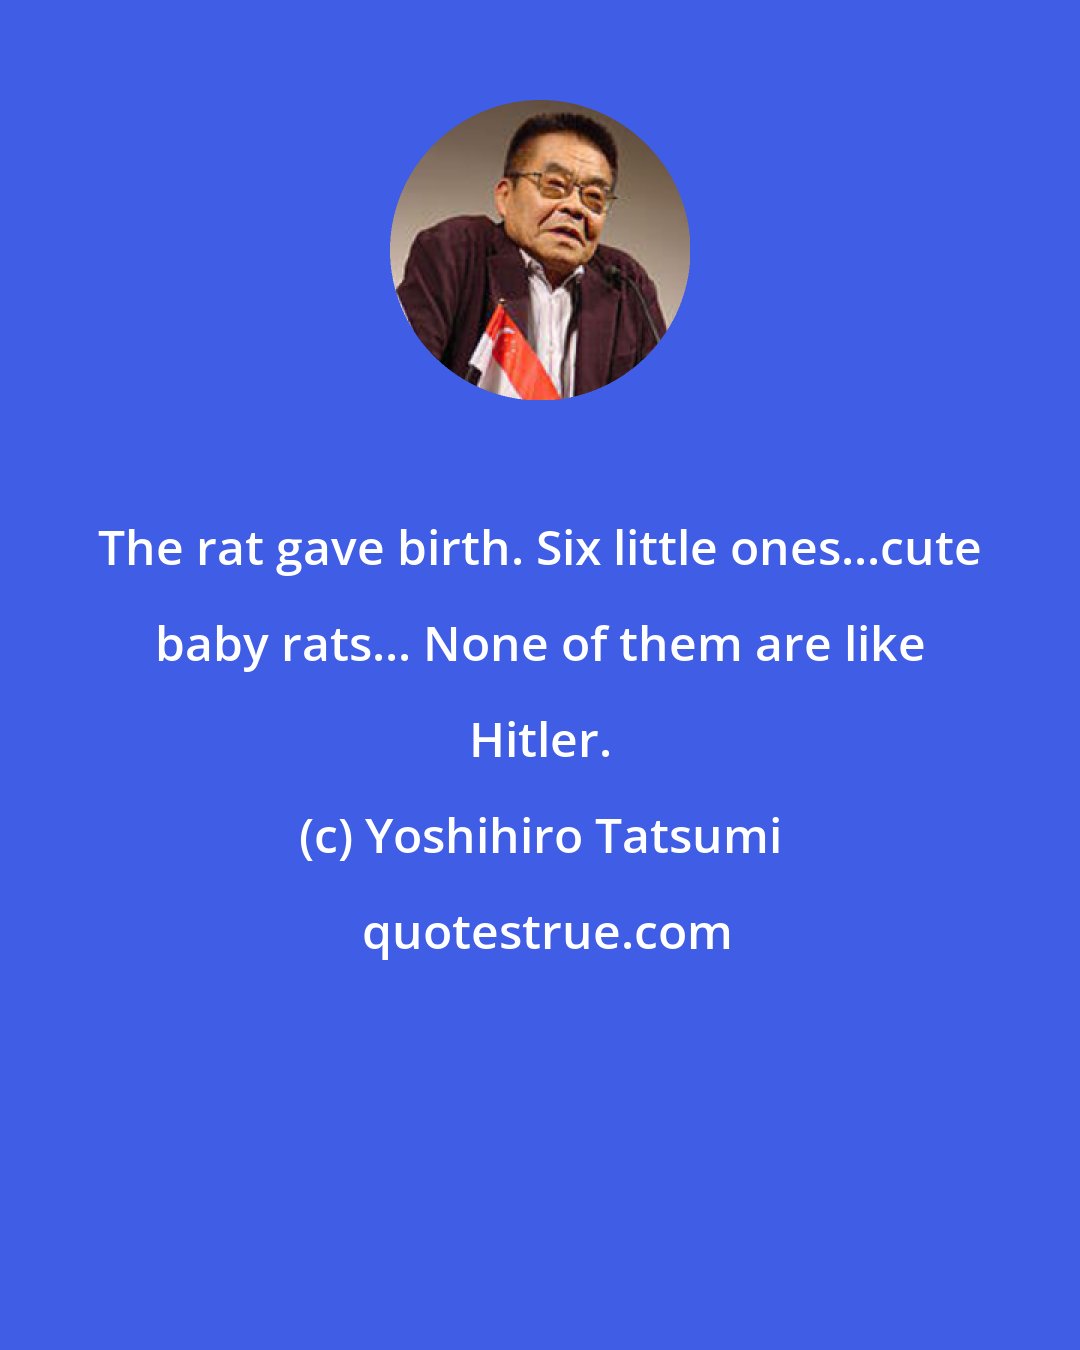 Yoshihiro Tatsumi: The rat gave birth. Six little ones...cute baby rats... None of them are like Hitler.